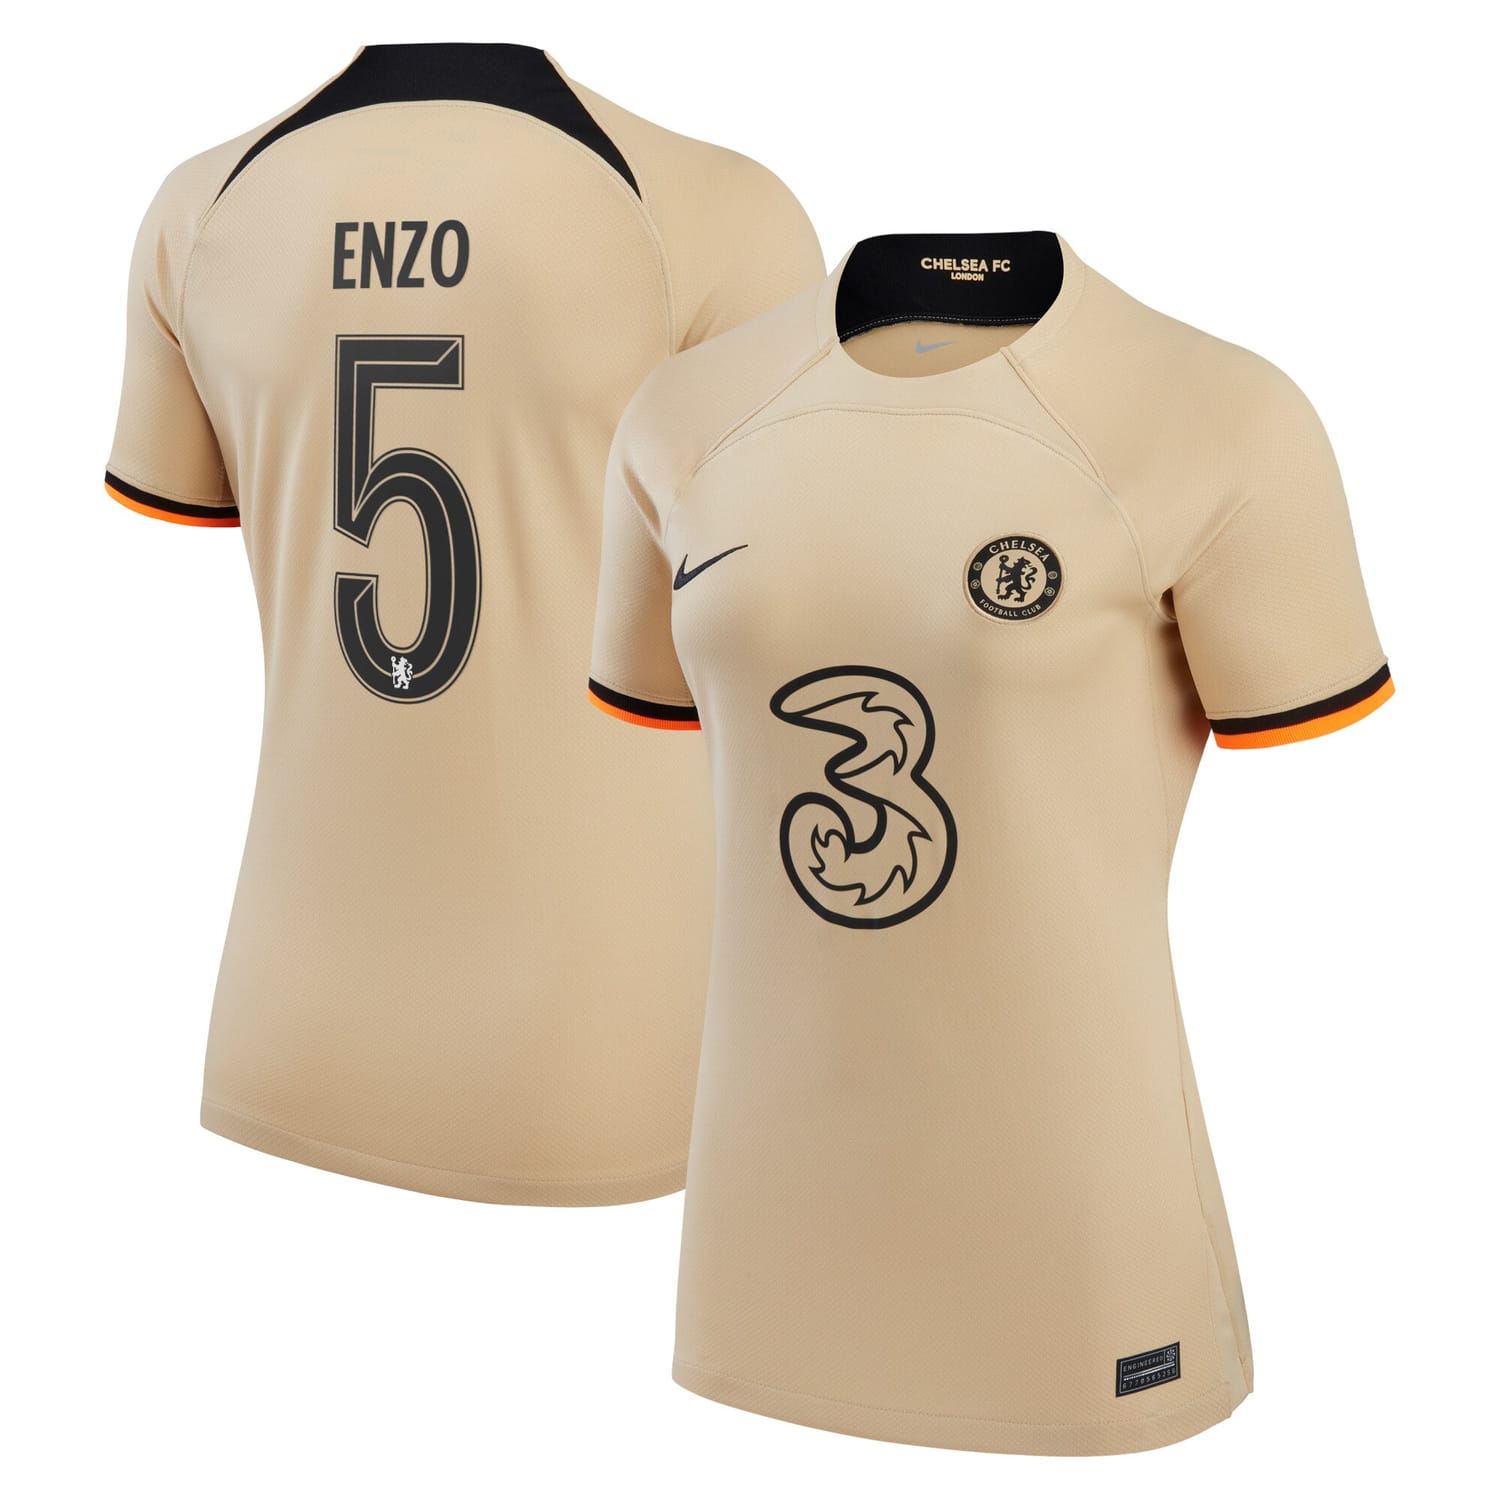 Premier League Chelsea Third Cup Jersey Shirt 2022-23 player Enzo Fernández 5 printing for Women